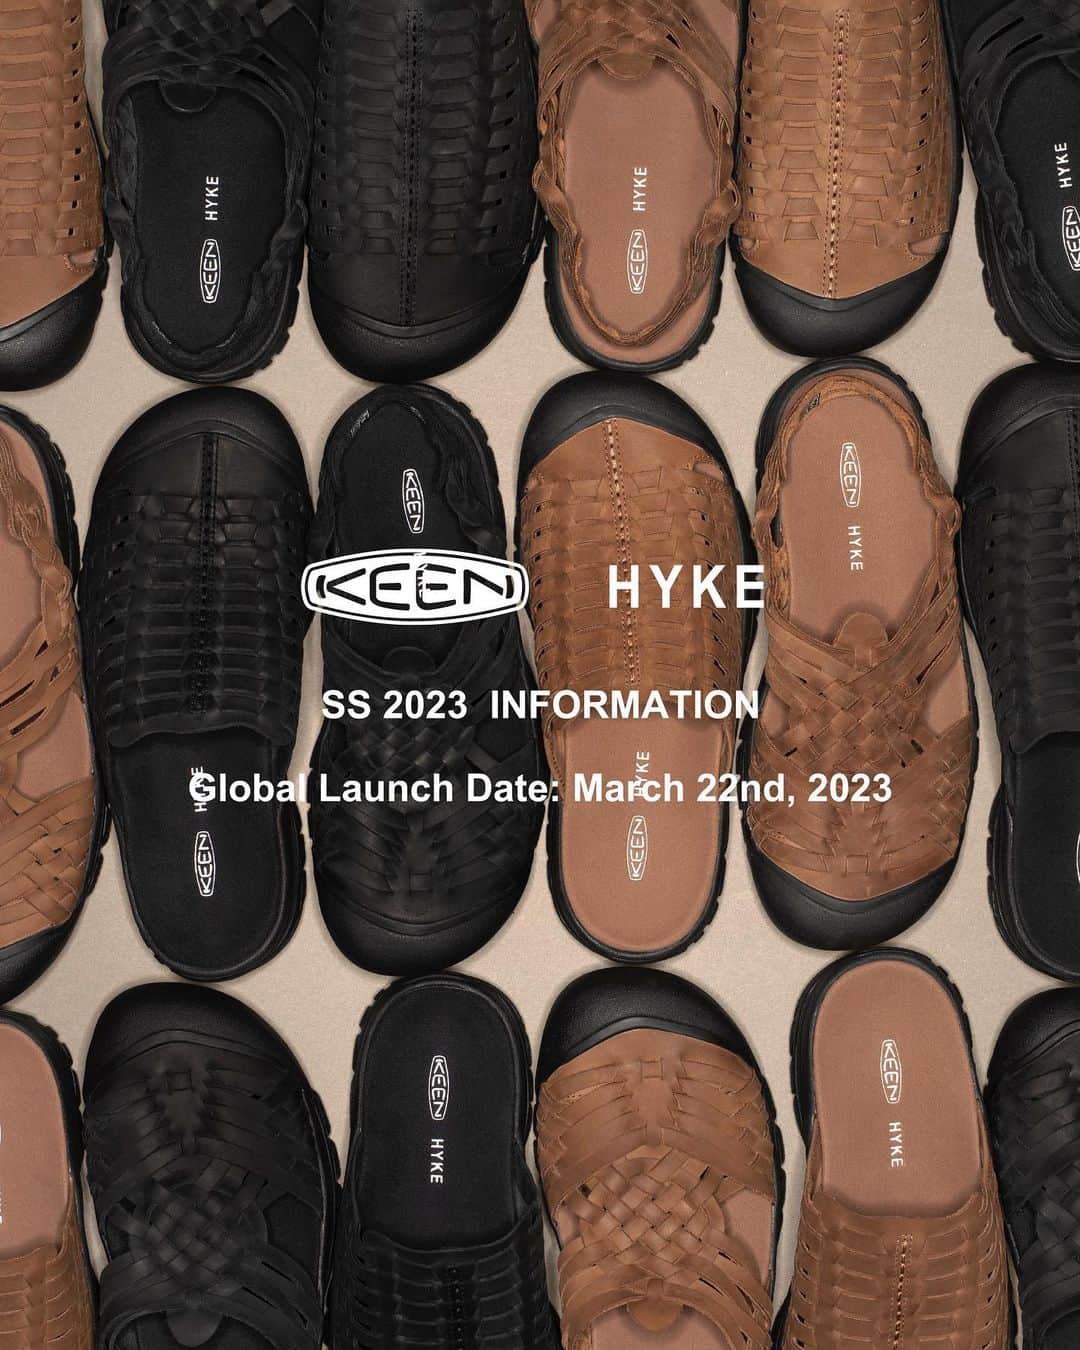 HYKEのインスタグラム：「Global Launch Date: March 22nd, 2023 - ・KEEN EUROPE  OFFICIAL ONLINE STORE http://www.keenfootwear.com/de-de/ ・KEEN CHINA TMALL  OFFICIAL ONLINE STORE http://keenyd.tmall.com/shop/view_shop.htm?spm=a230r.1.14.4.4742519KFluQO&user_number_id=2081241306 ・KEEN CHINA JD  OFFICIAL ONLINE STORE http://mall.jd.com/index-761611.html?from=pc - - "KEEN× HYKE" SS 2023 COLLECTIONグローバル発売のご案内 - 下記日程にて"KEEN × HYKE" FW 2023 COLLECTIONがグローバルで発売解禁となります。 発売解禁日 : 2023年3月22日 水曜日 - 発売日、販売方法に関しては取扱店舗により異なりますので、販売店舗に直接 お問い合わせください。 - @keen @keen_japan #keenhyke #keen #hyke」